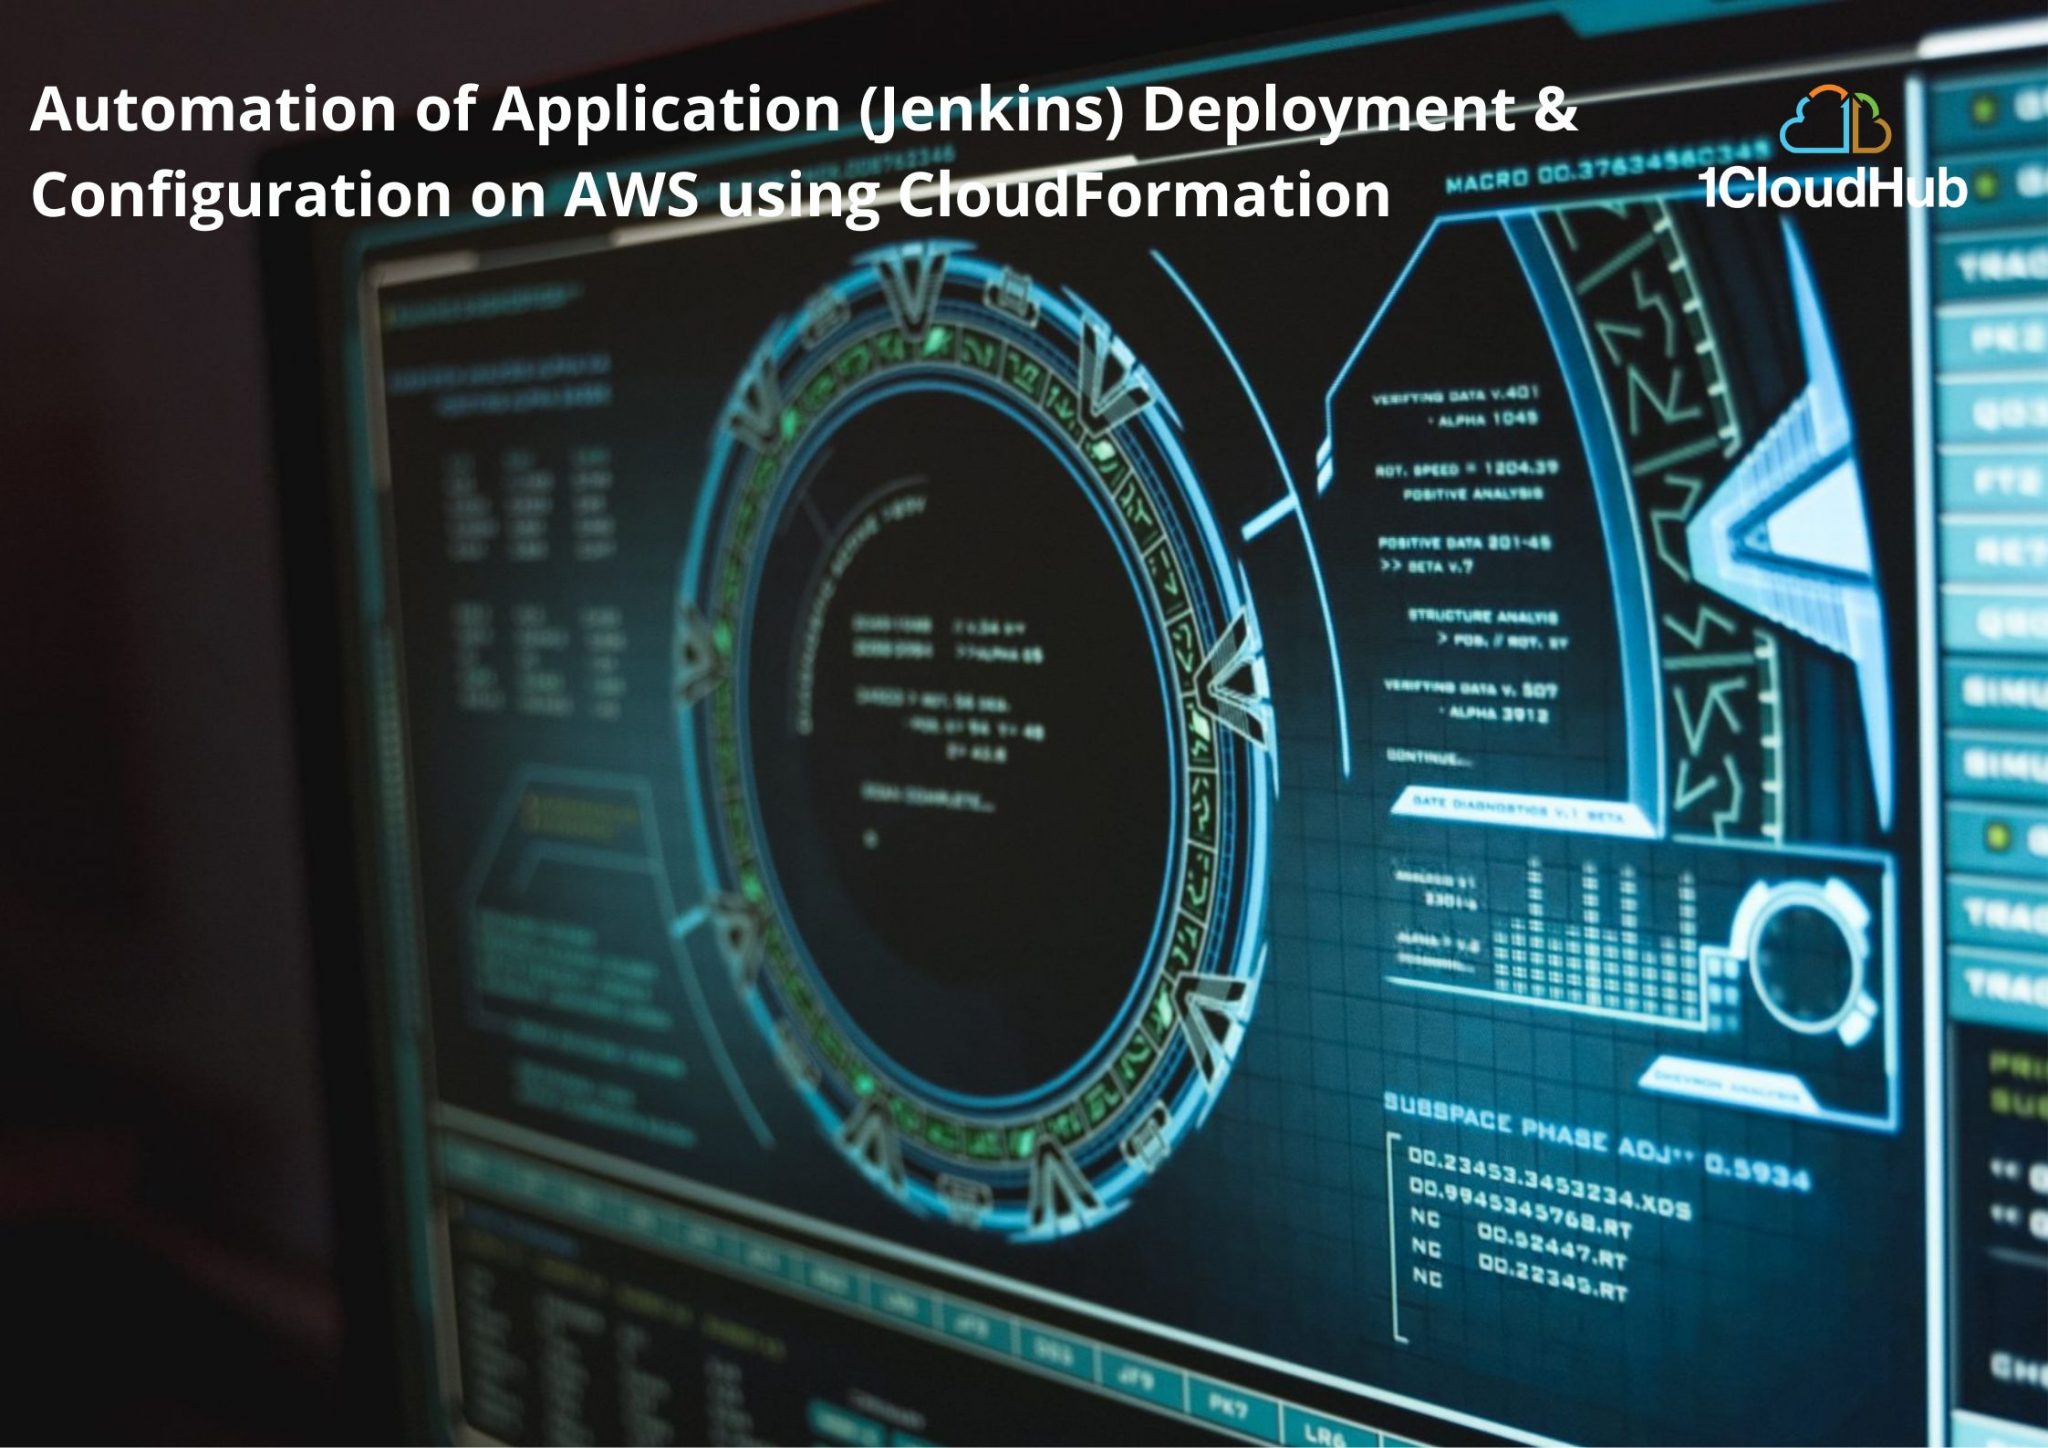 Automation of Application (Jenkins) Deployment & Configuration on AWS using CloudFormation